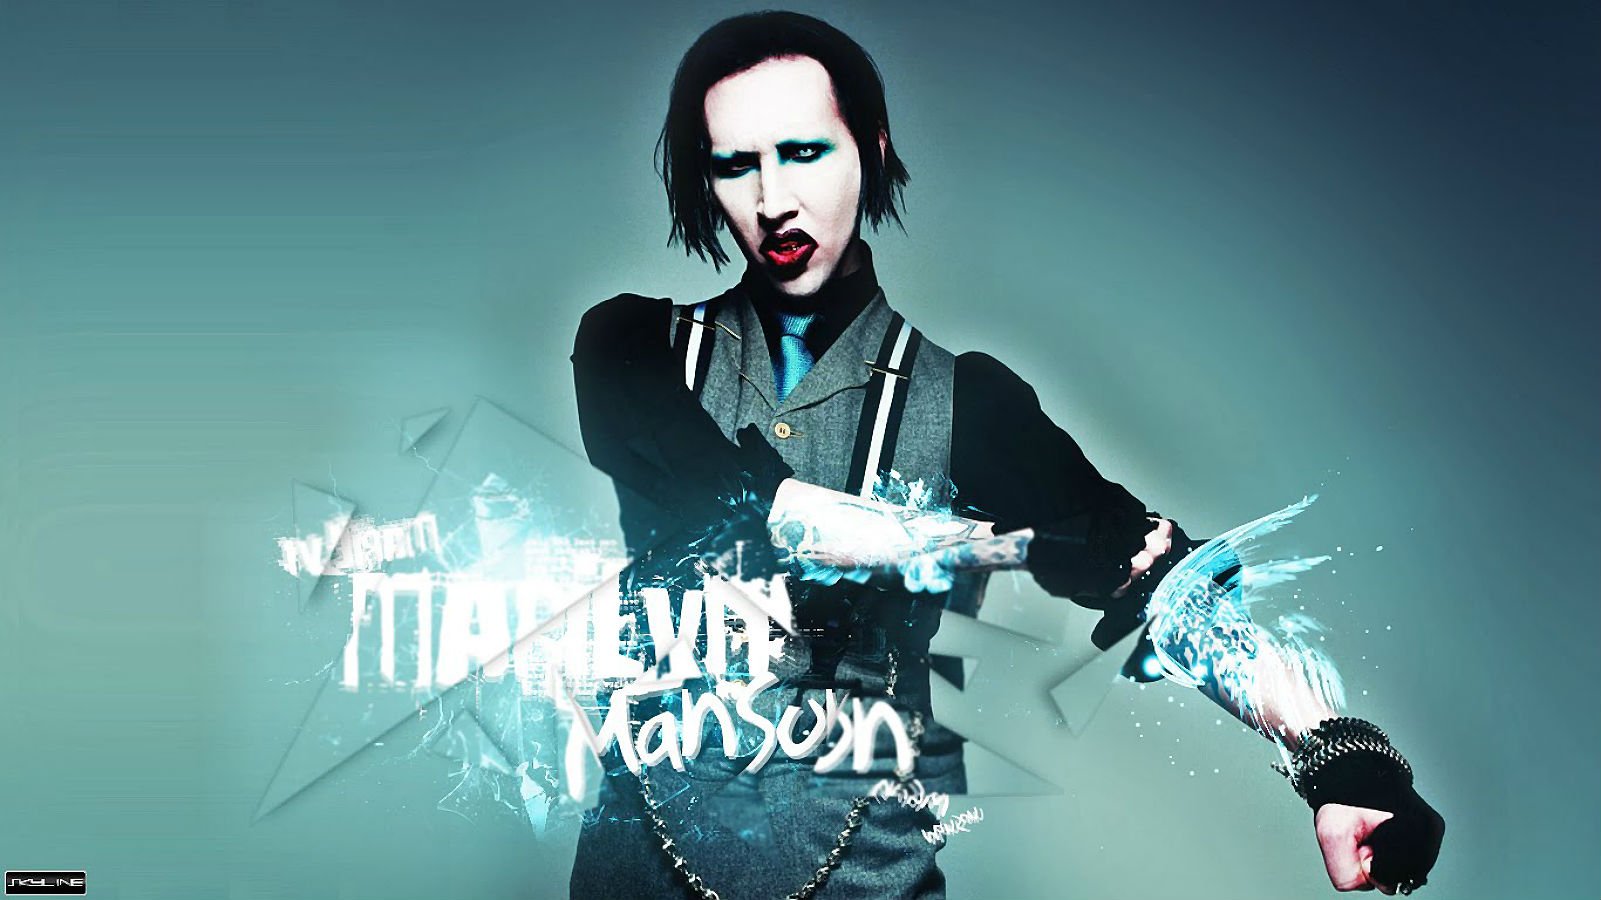 Marilyn Manson Wallpaper and Background Image | 1500x1081 